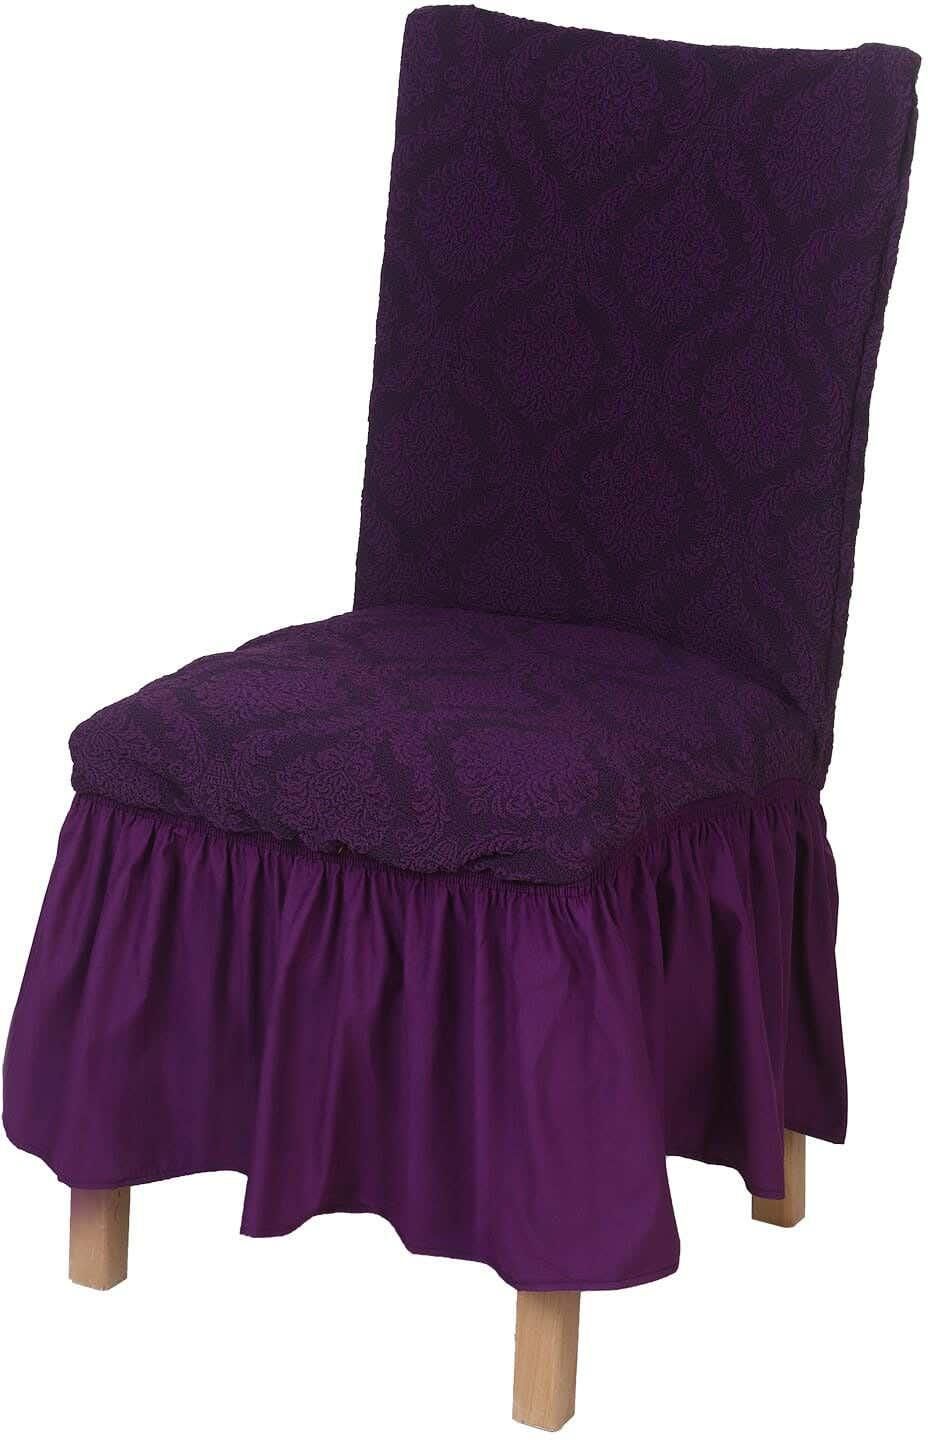 Get Turkan Jacquard Dining Chair Cover Set, 6 Pieces, Approximately 2100 Grm - Mauve with best offers | Raneen.com